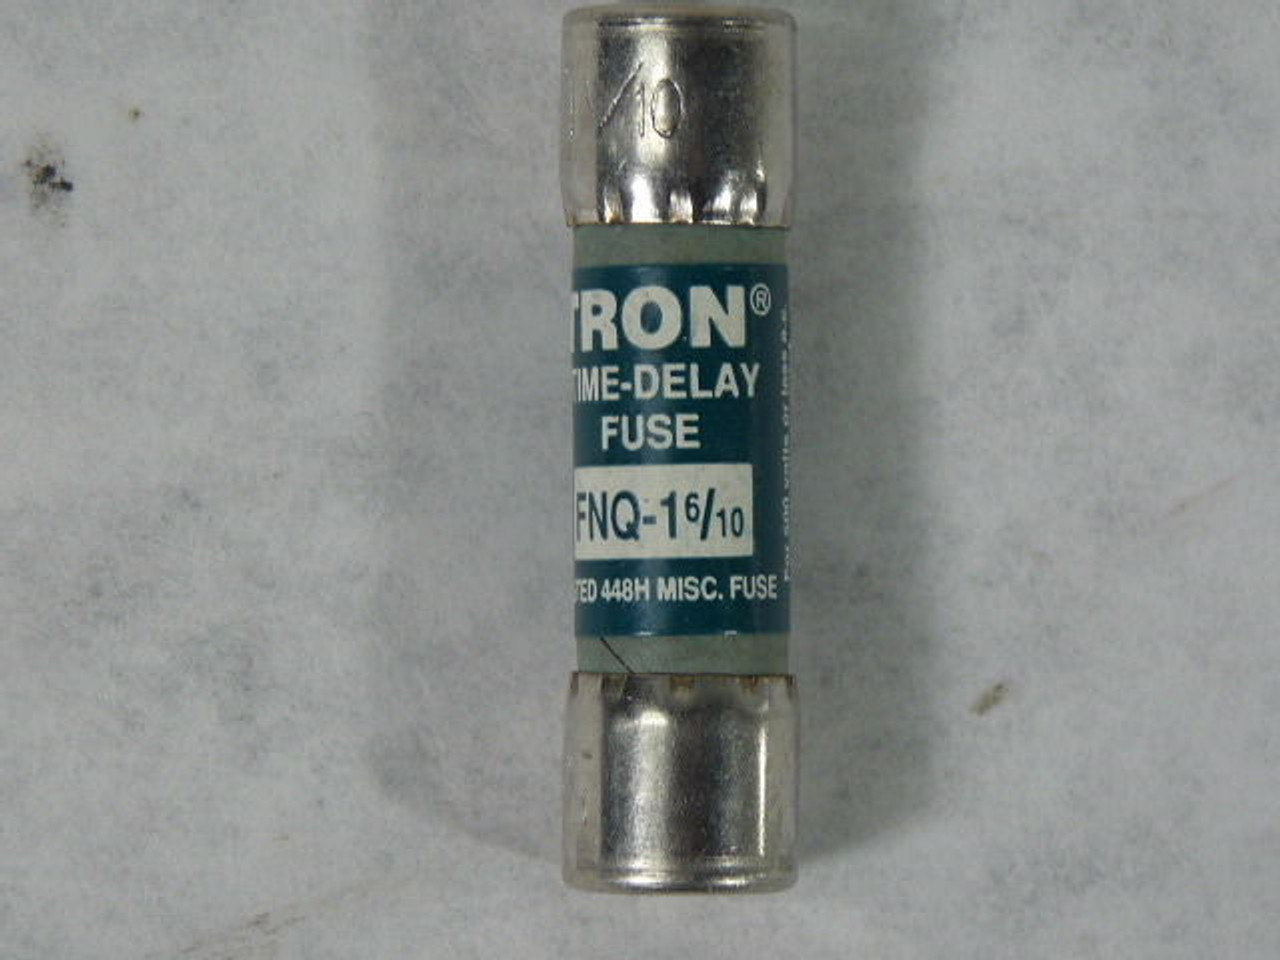 Fusetron FNQ-1-6/10 Time Delay Fuse 1-6/10A 500V USED